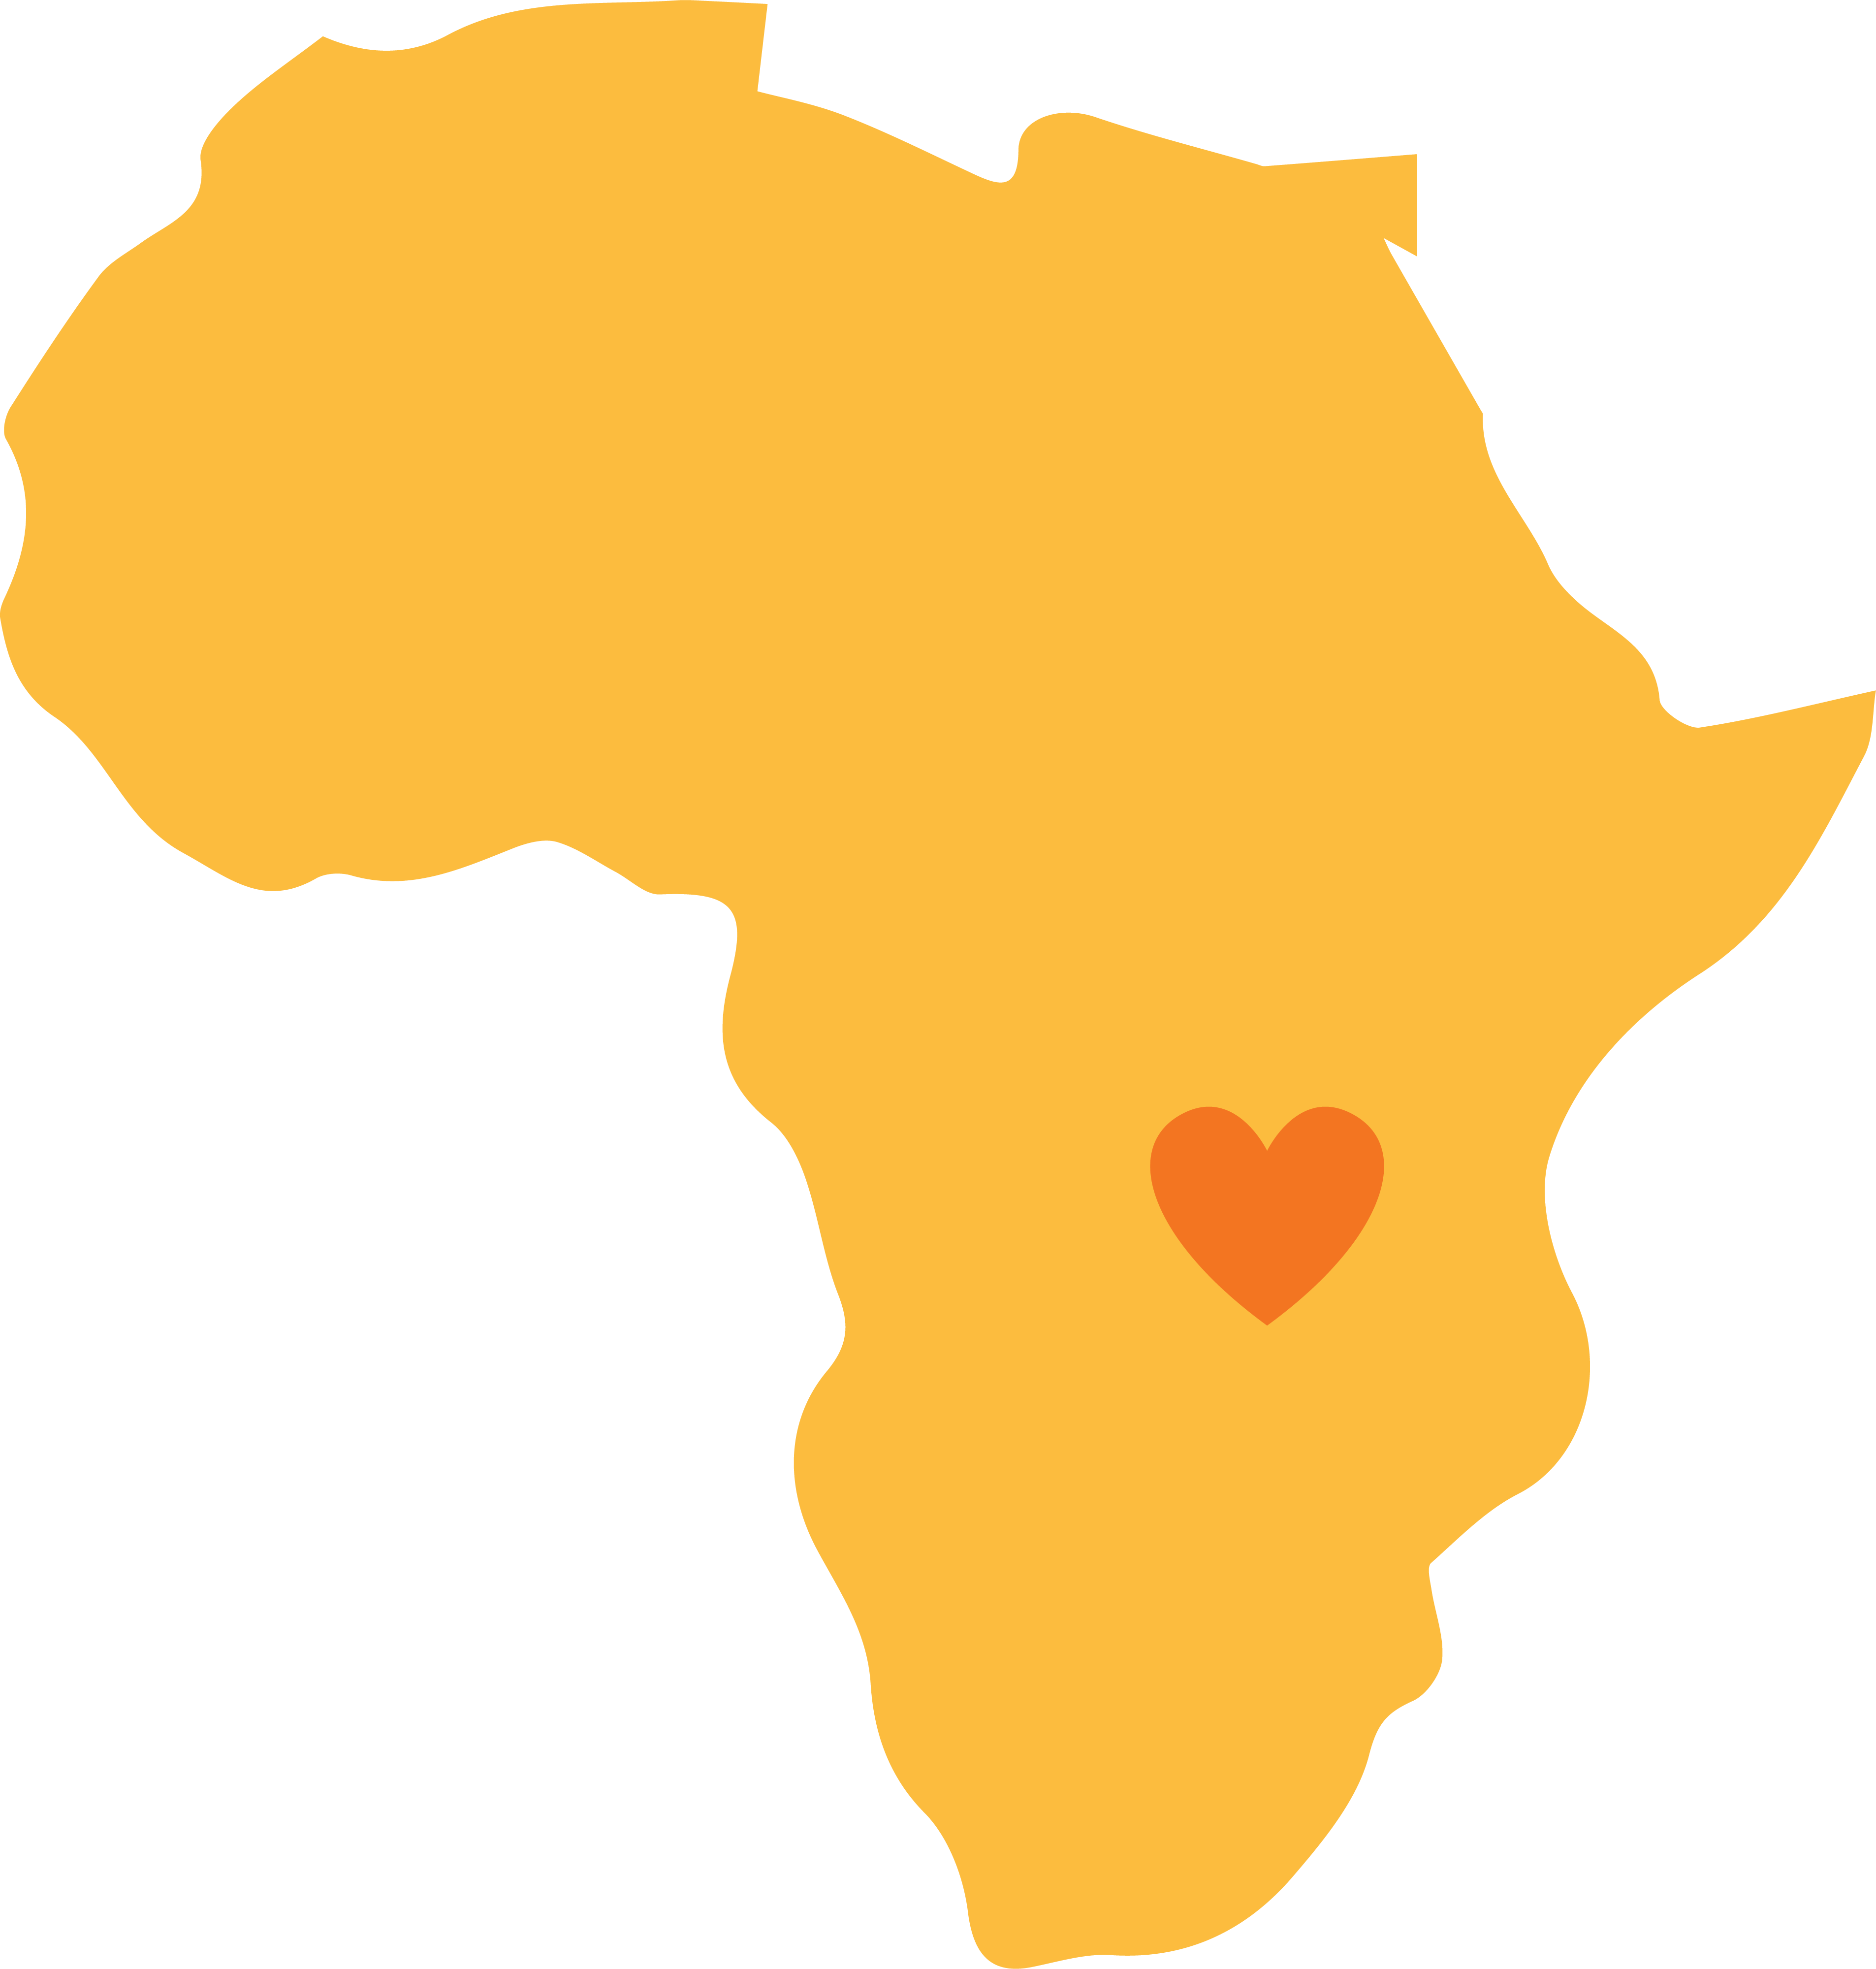 Yellow icon of Africa with an orange heart on Zambia.